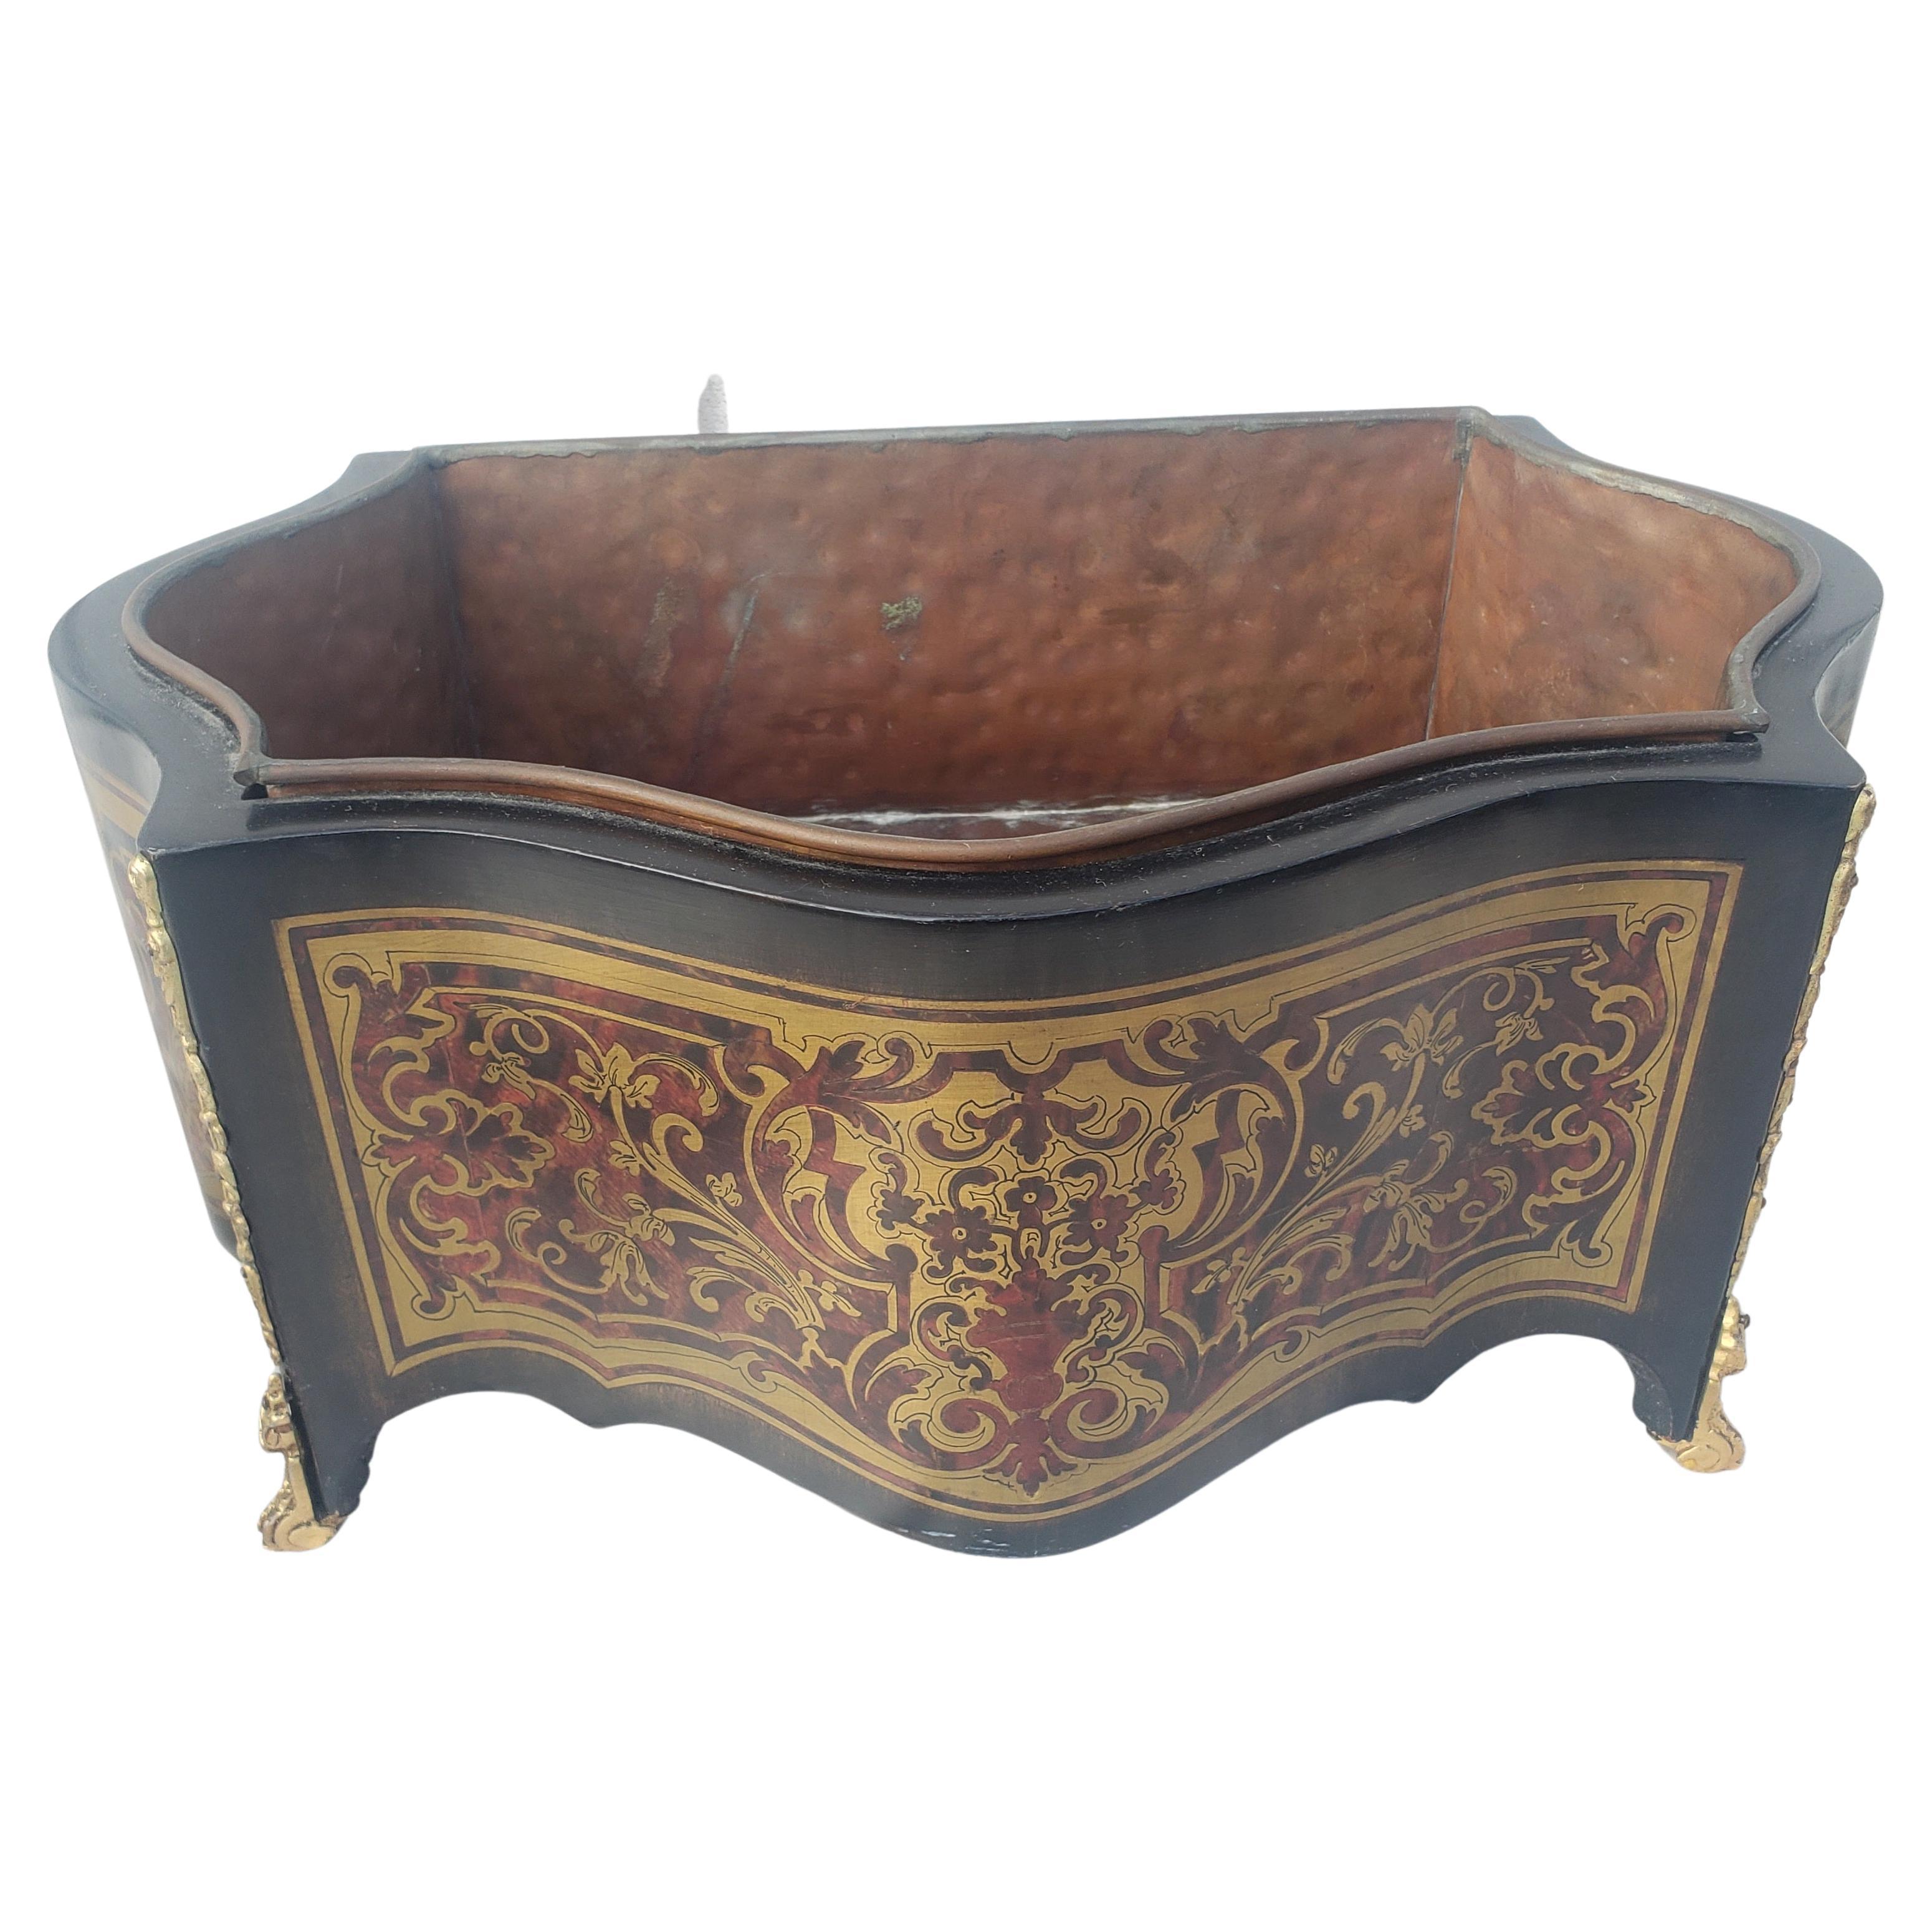 Napoleon III Mahogany Marquetry Style Decorated and Copper Liner Jardiniere planter. Very good antique condition. Measures 16